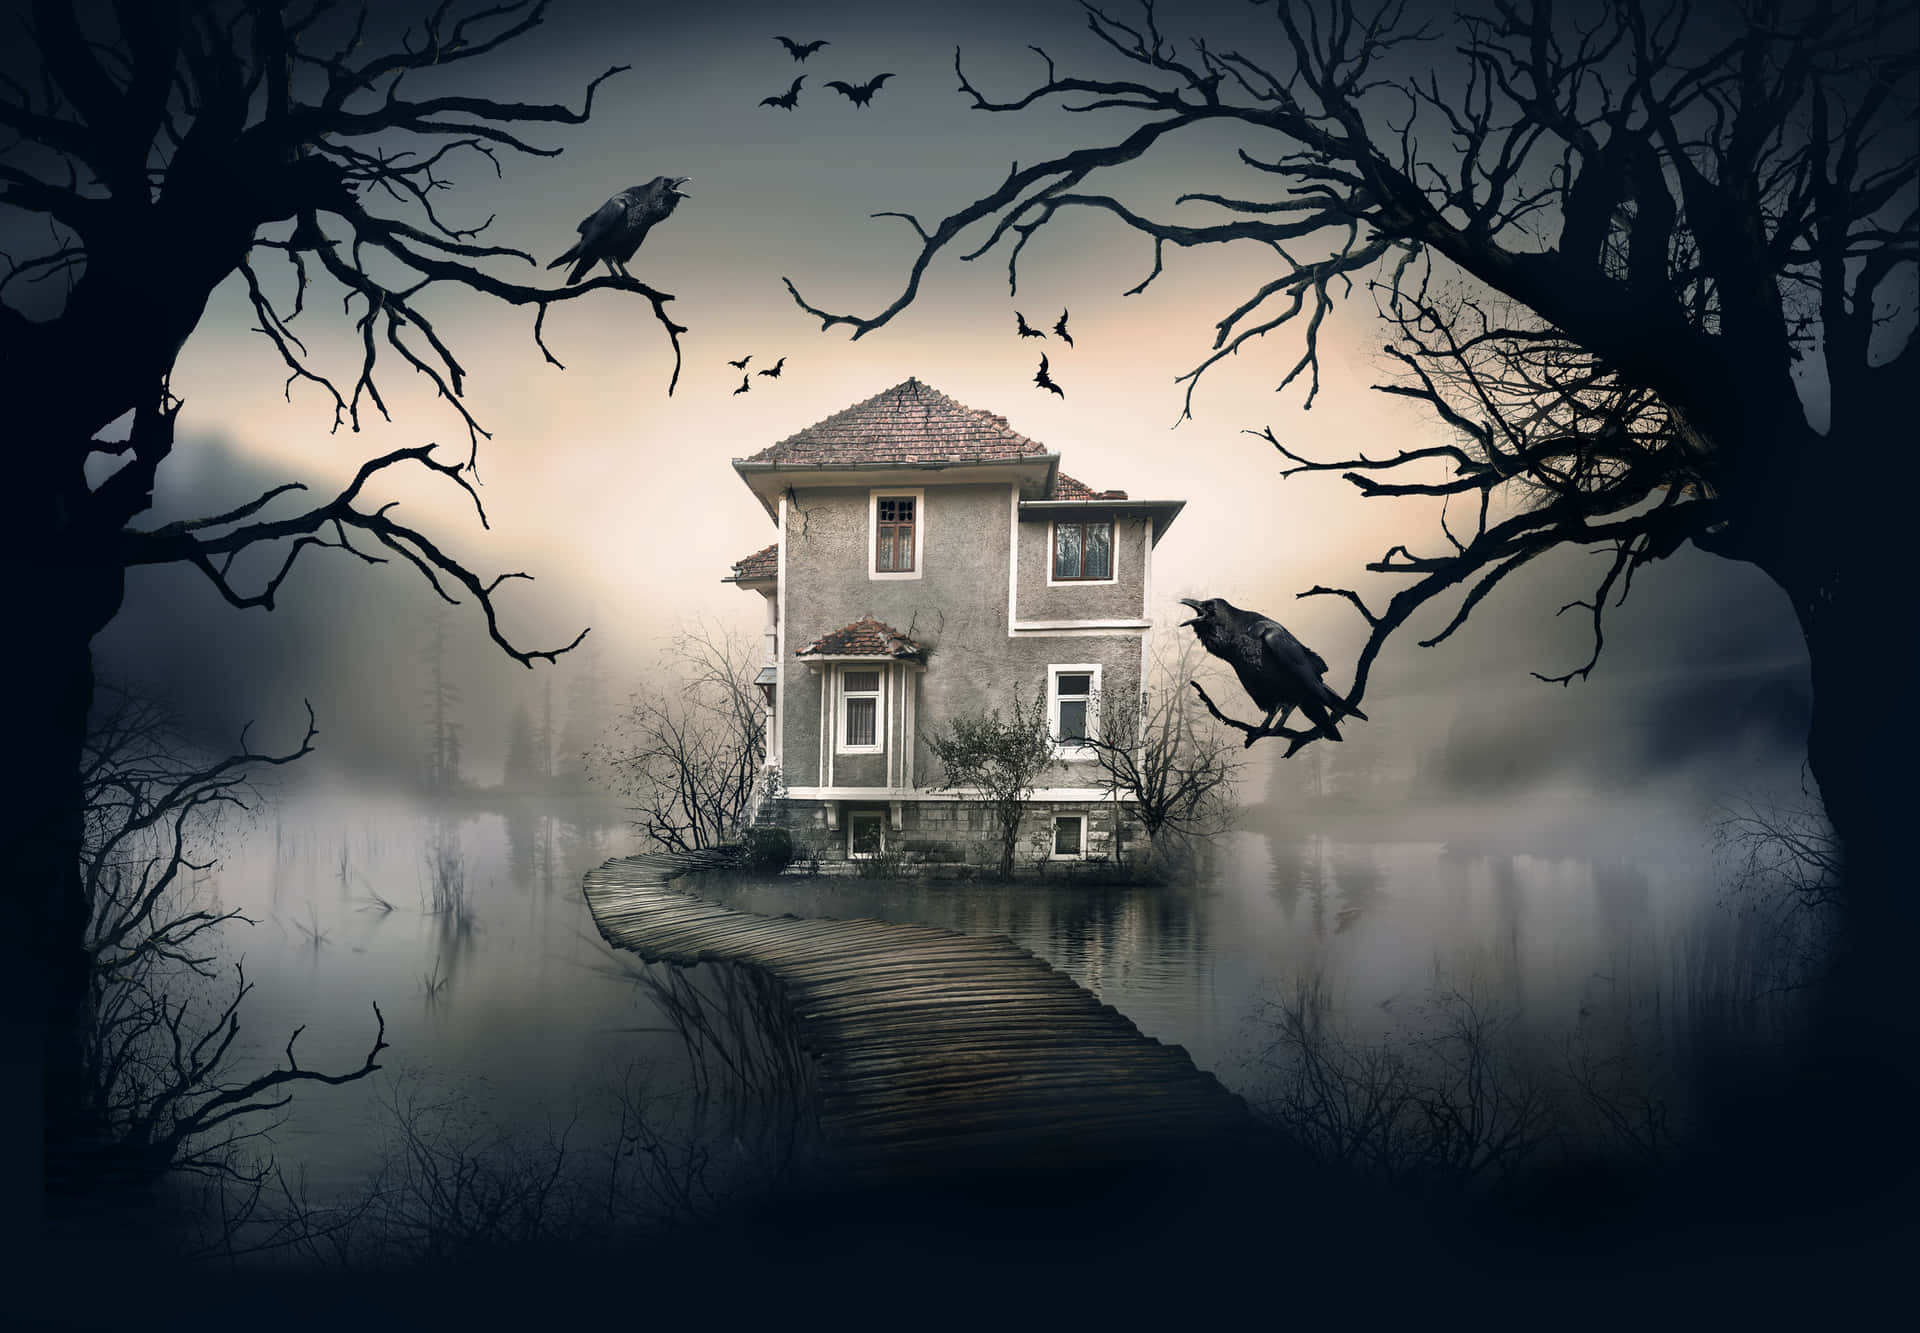 Explore an ancient Haunted House with a mysterious past